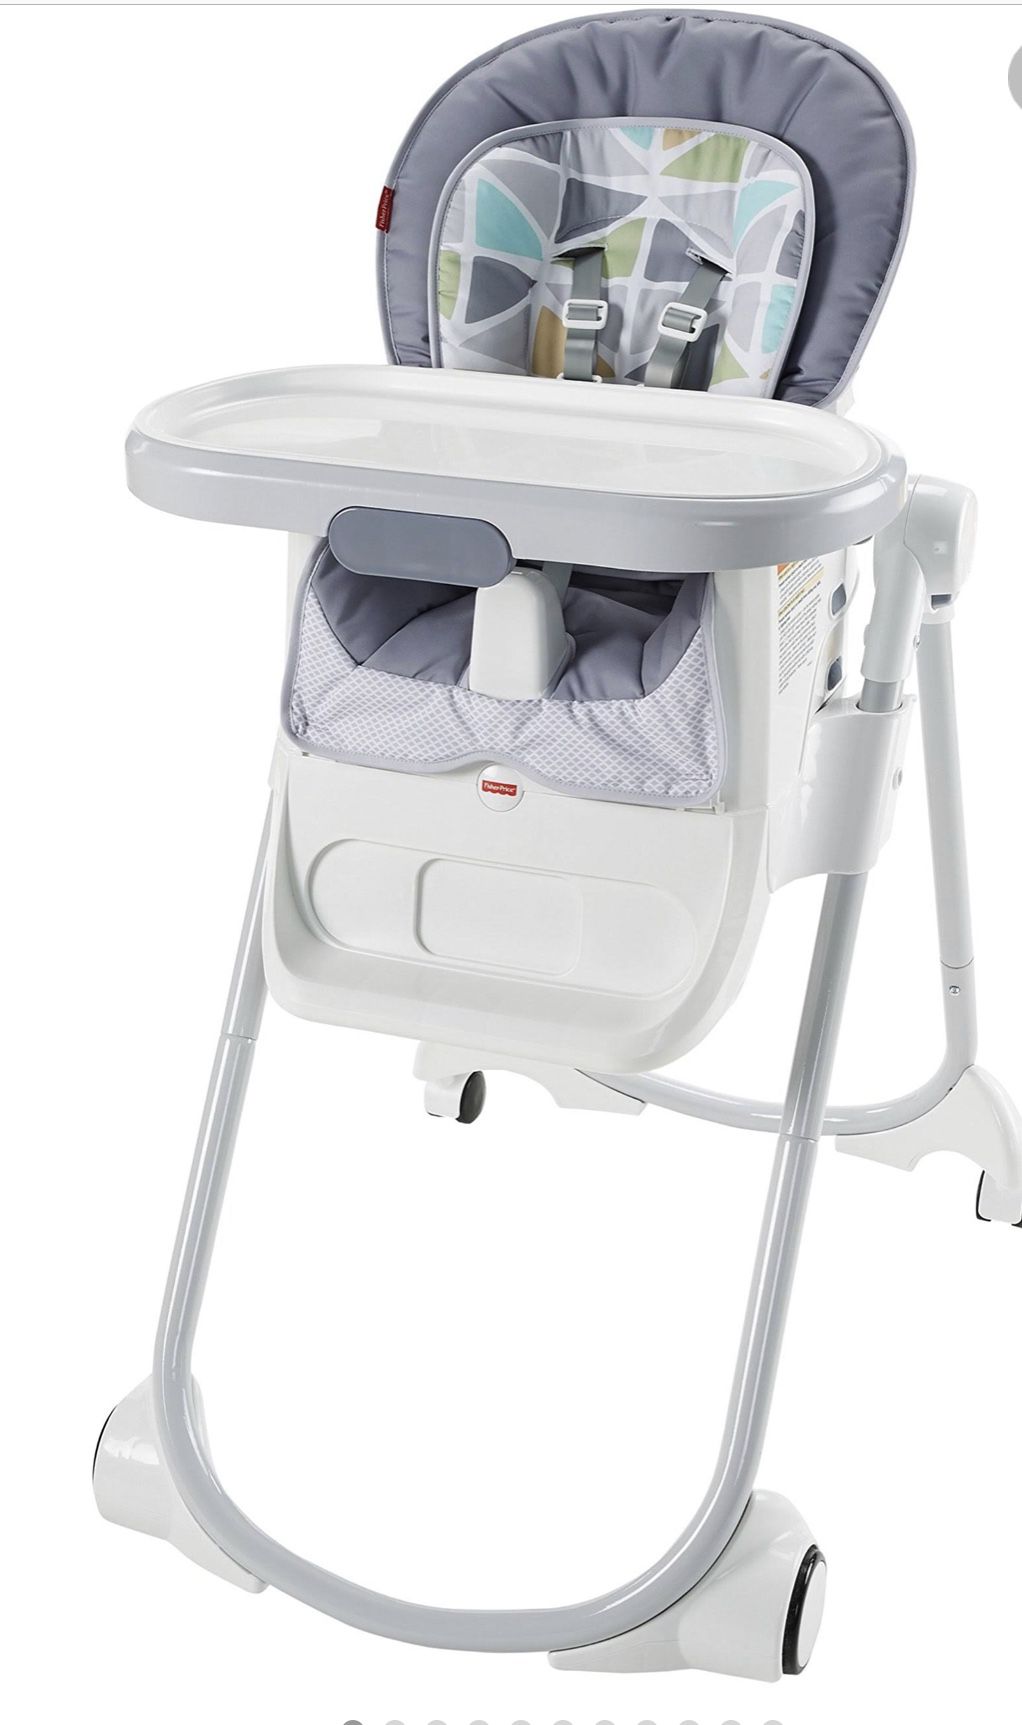 Fisher Price 4 in 1 high chair